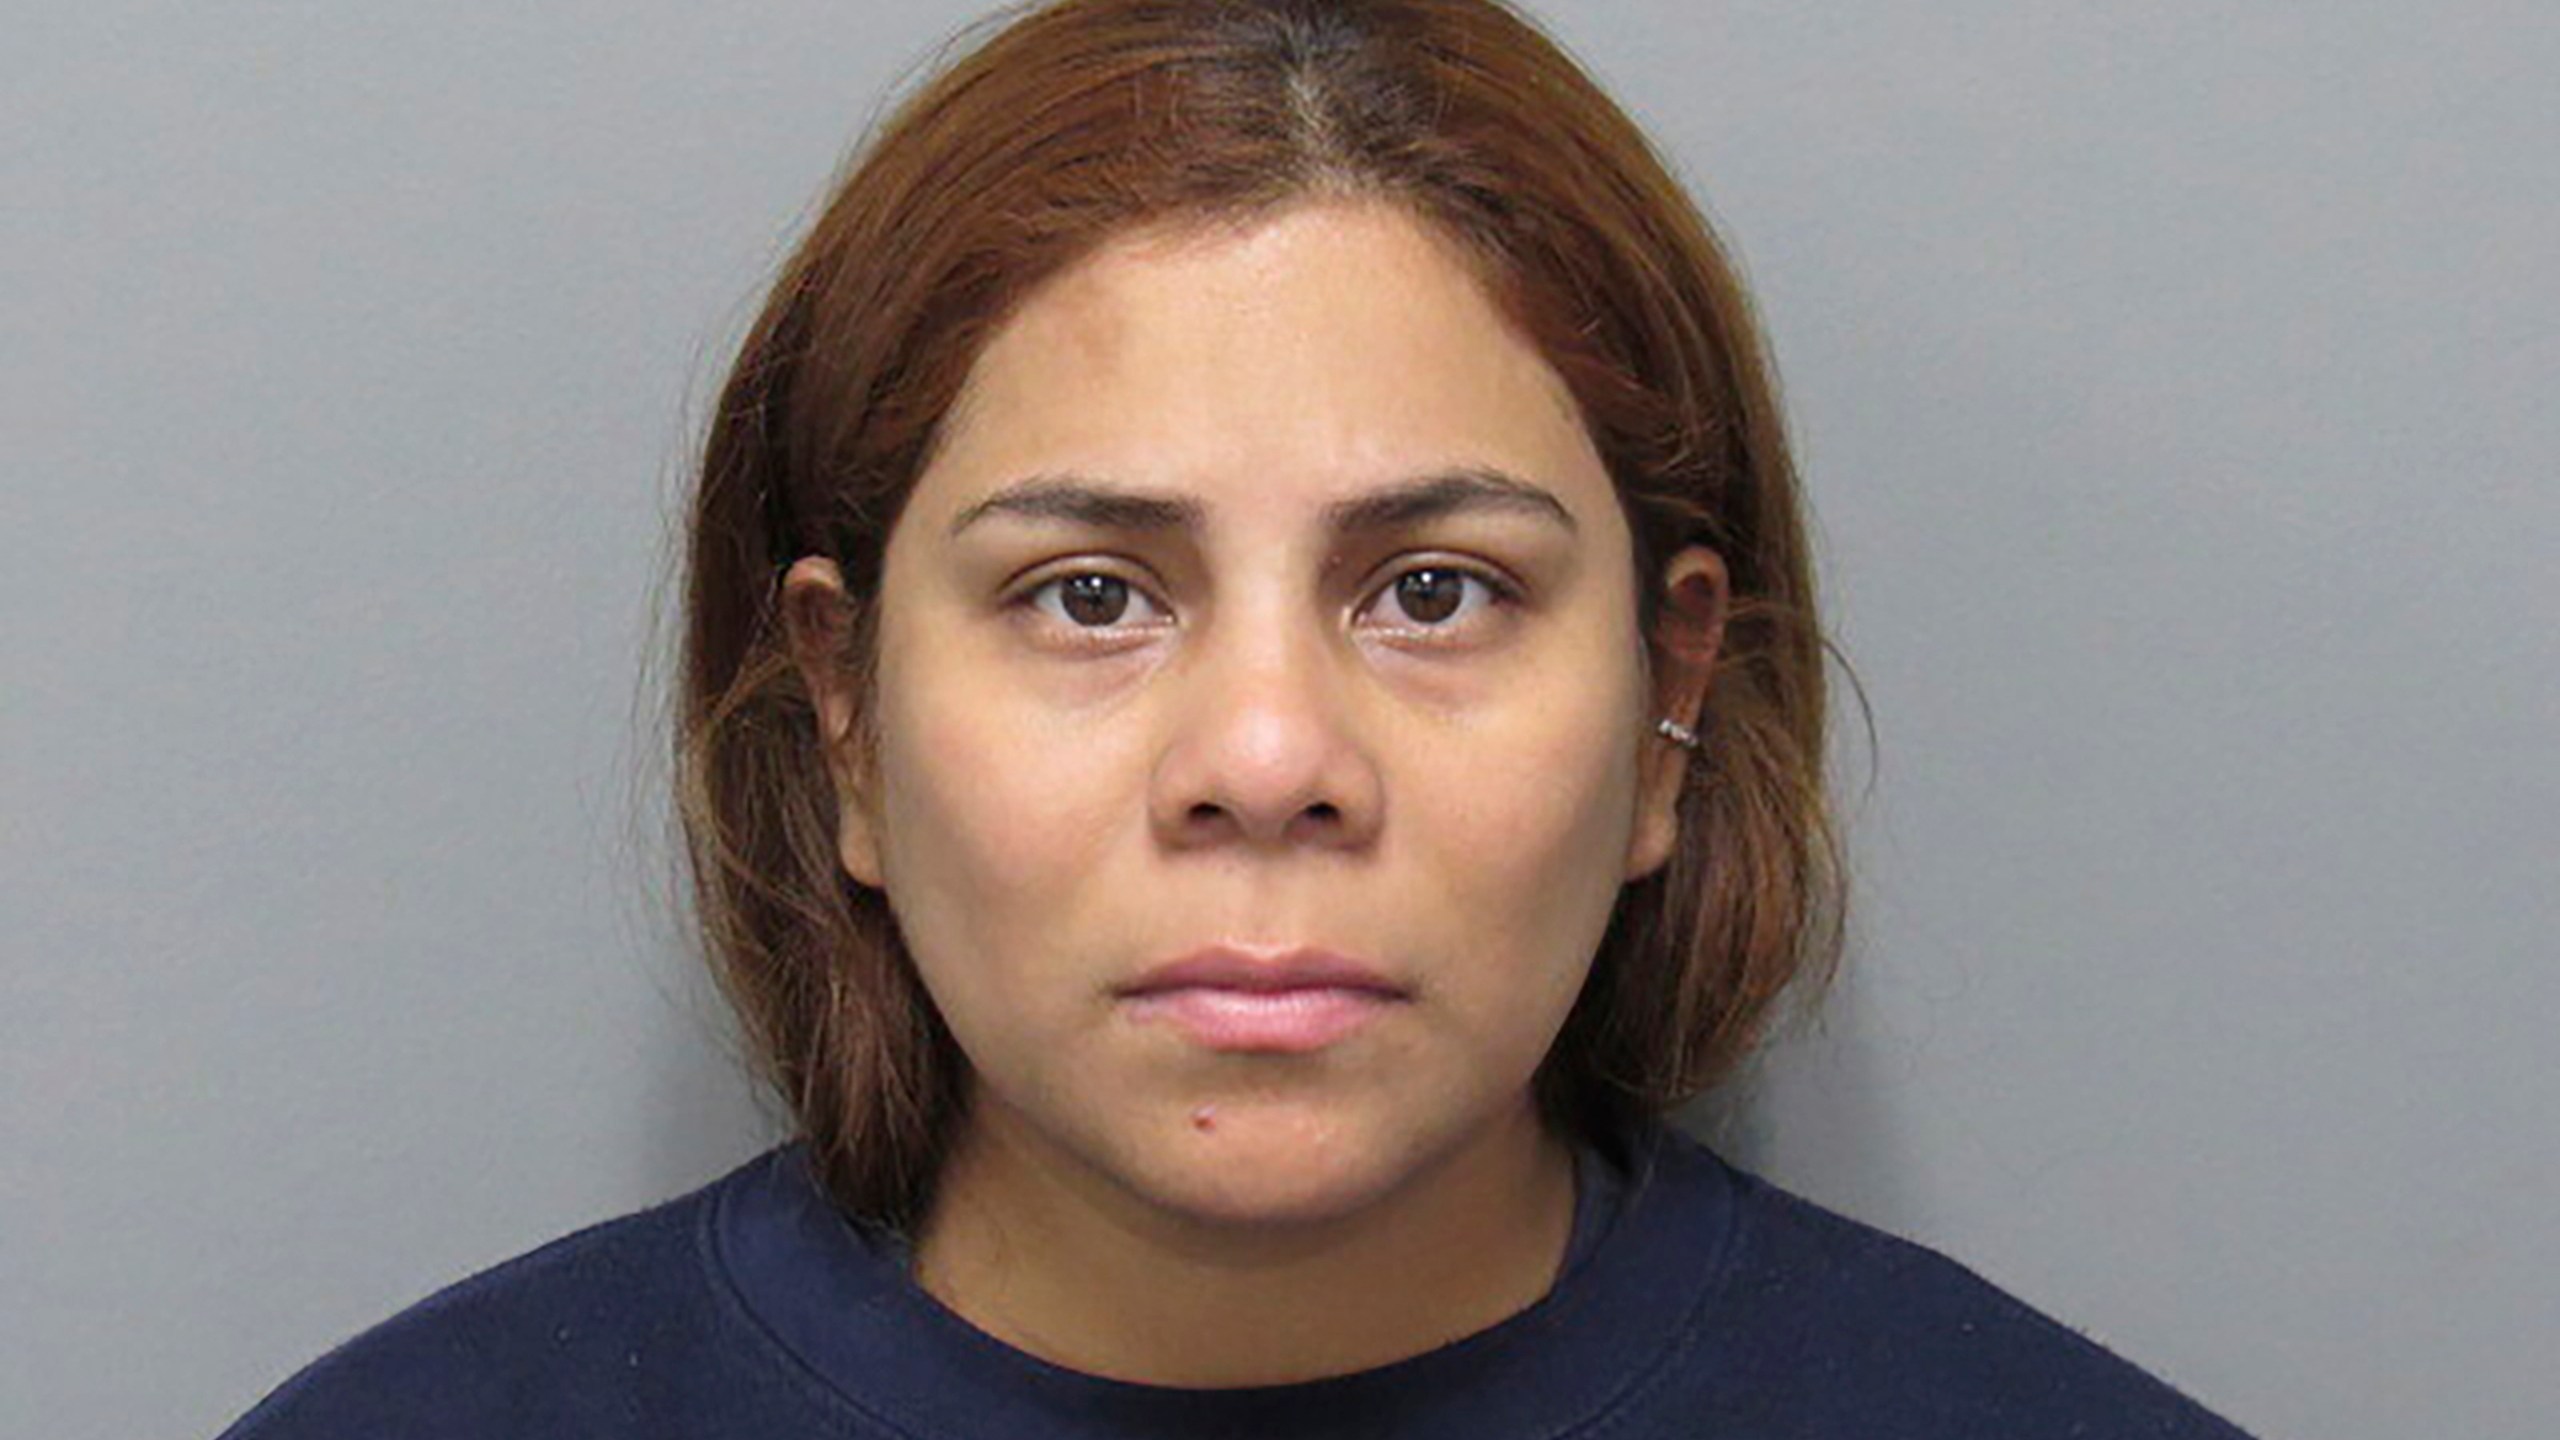 FILE - This booking photo provided by the Cuyahoga County, Ohio, Sheriff's Department shows Kristel Candelario, of Cleveland, Ohio. The Ohio mother whose 16-month-old daughter died after being left home alone in a playpen for 10 days last summer while she went on vacation was sentenced Monday, March 18, 2024, to life in prison with no chance of parole. (Cuyahoga County Sheriff's Department via AP, File)